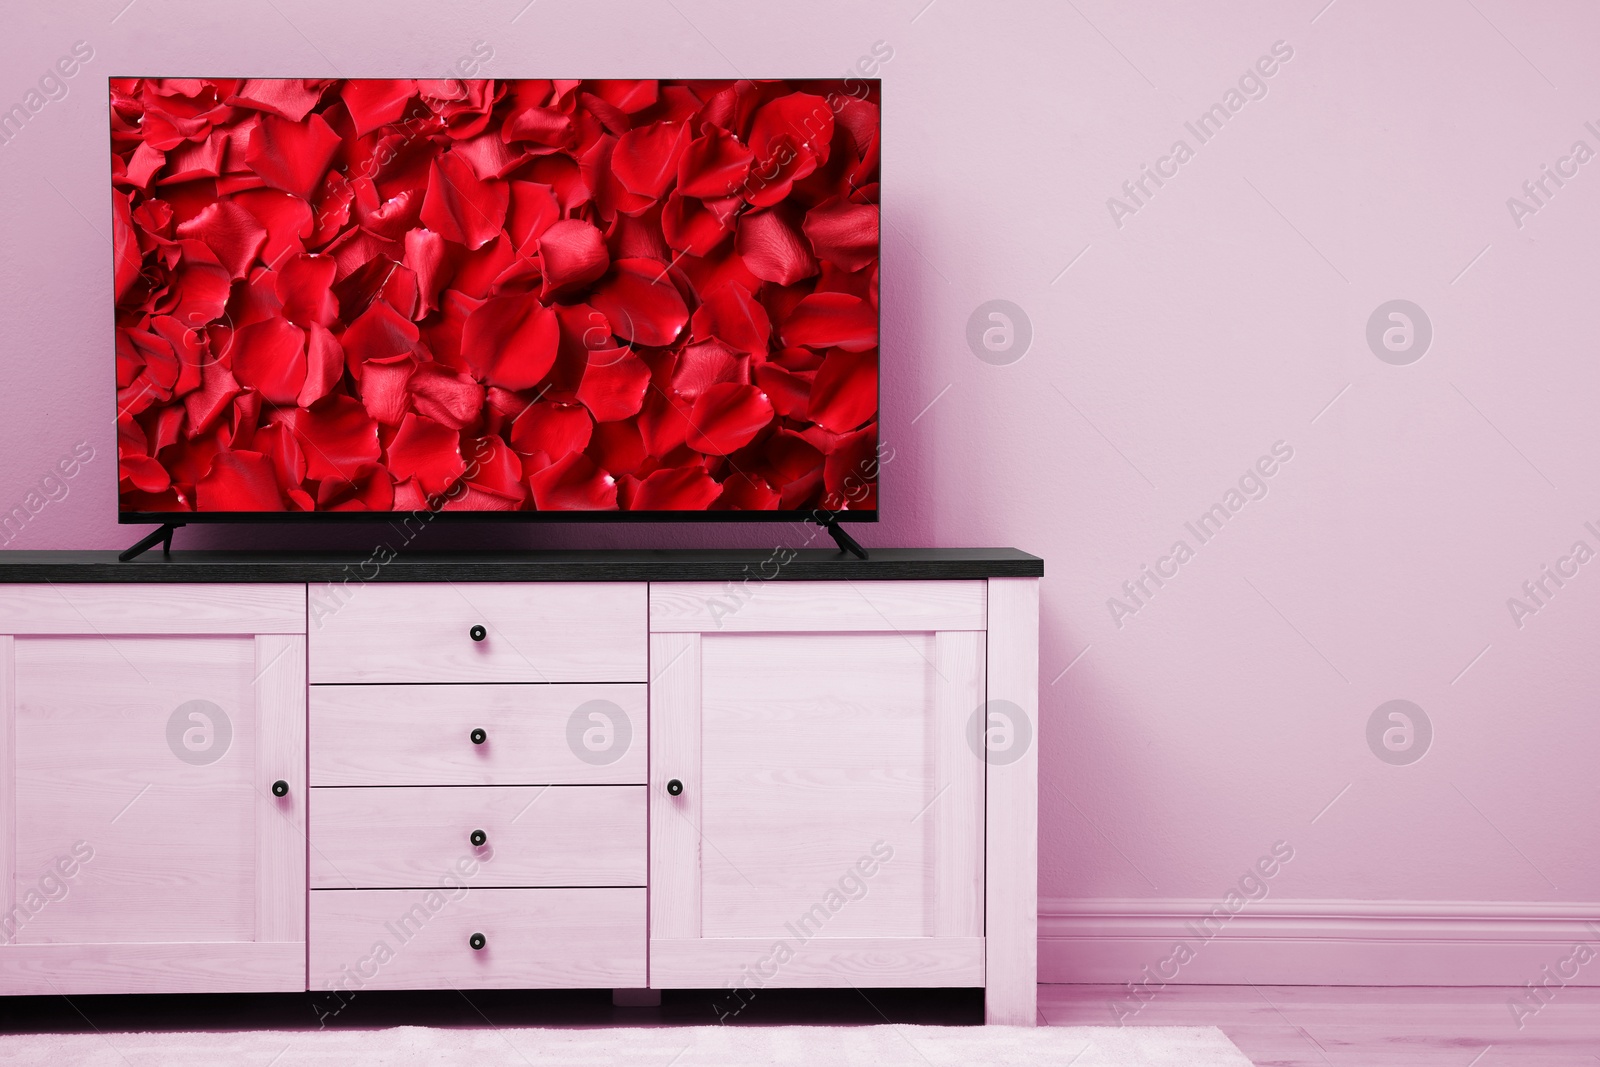 Image of TV screen with red rose petals on commode near pink wall in room, space for text